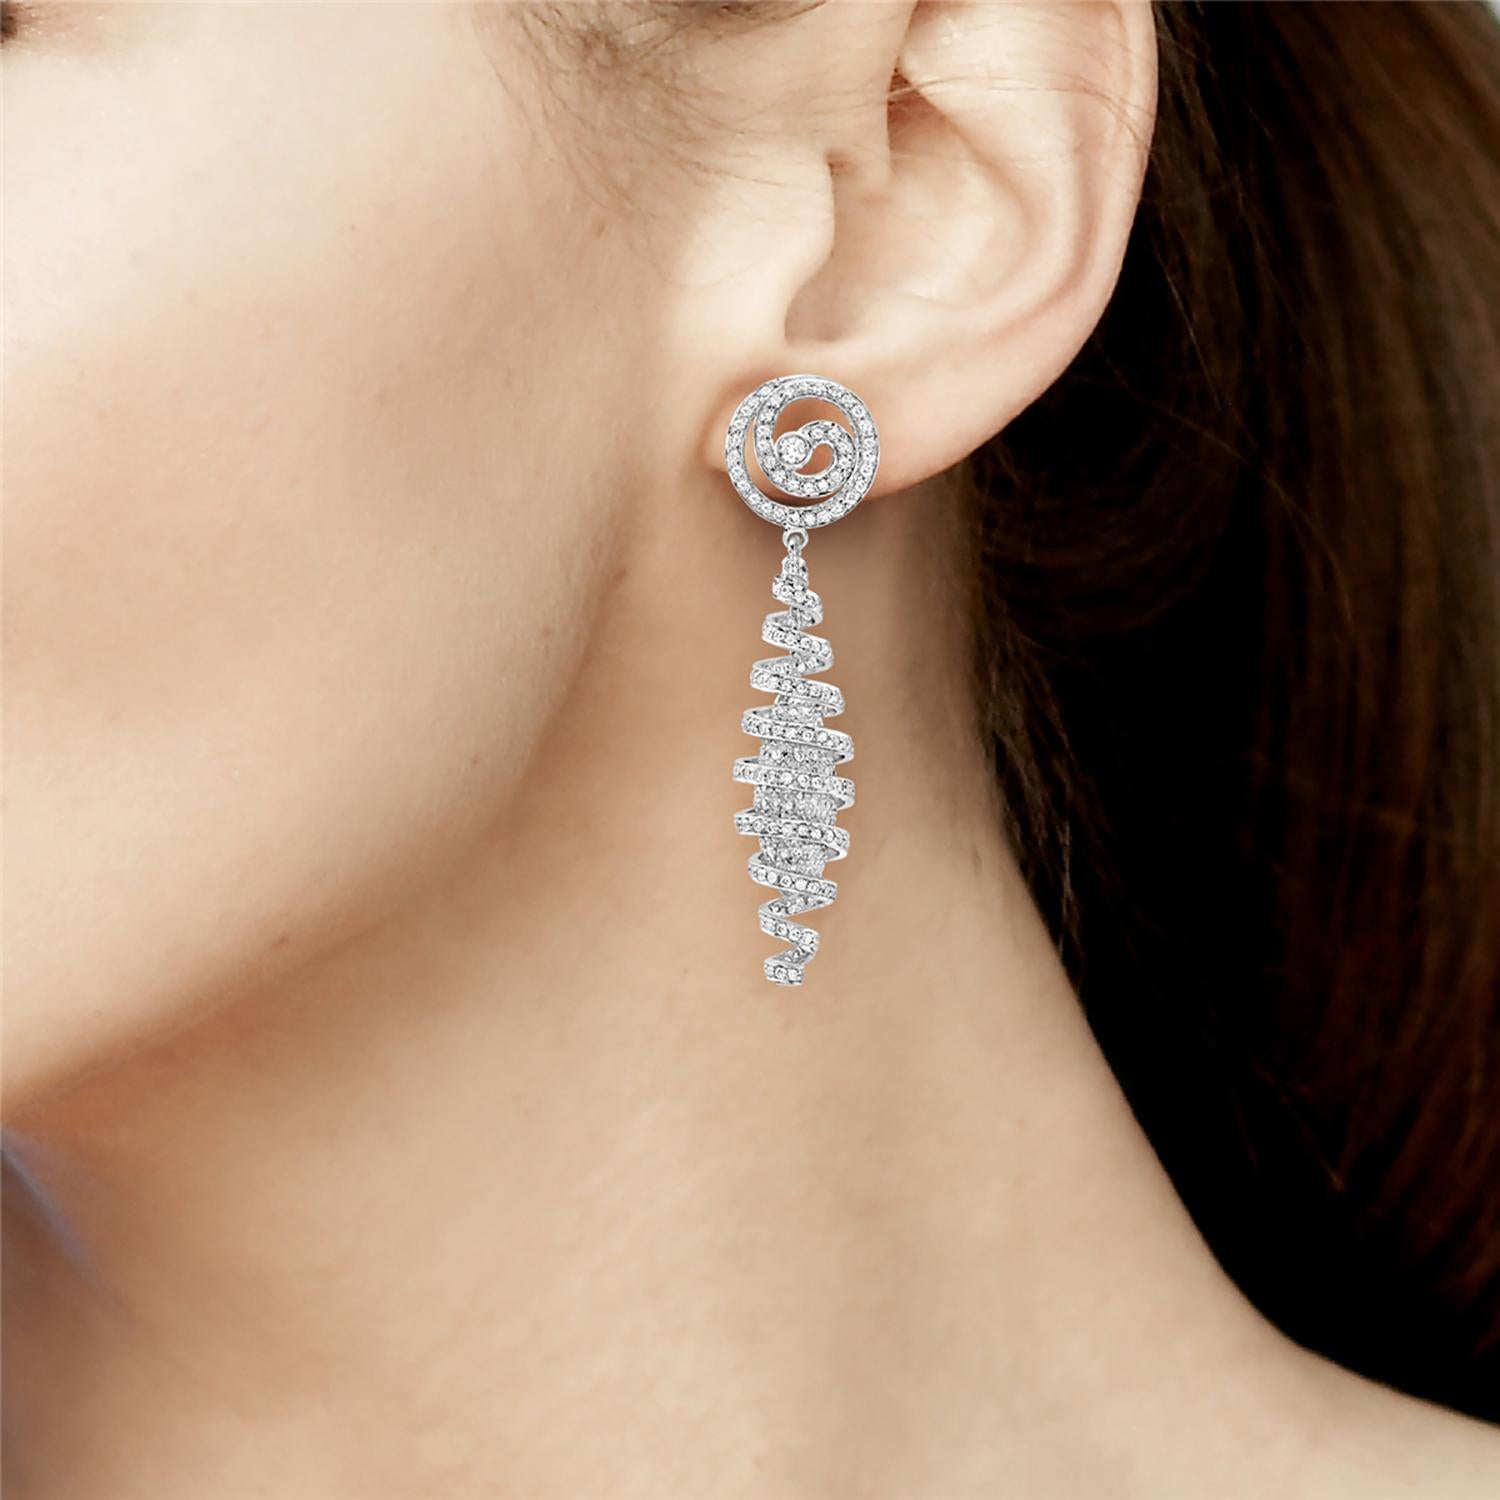 These exquisite earrings feature a hanging swirl shape crafted from lustrous 18k white gold. A stunning halo of pave diamonds encircles each earring, adding brilliant sparkle and elegance to any outfit. Perfect for special occasions or as a dazzling